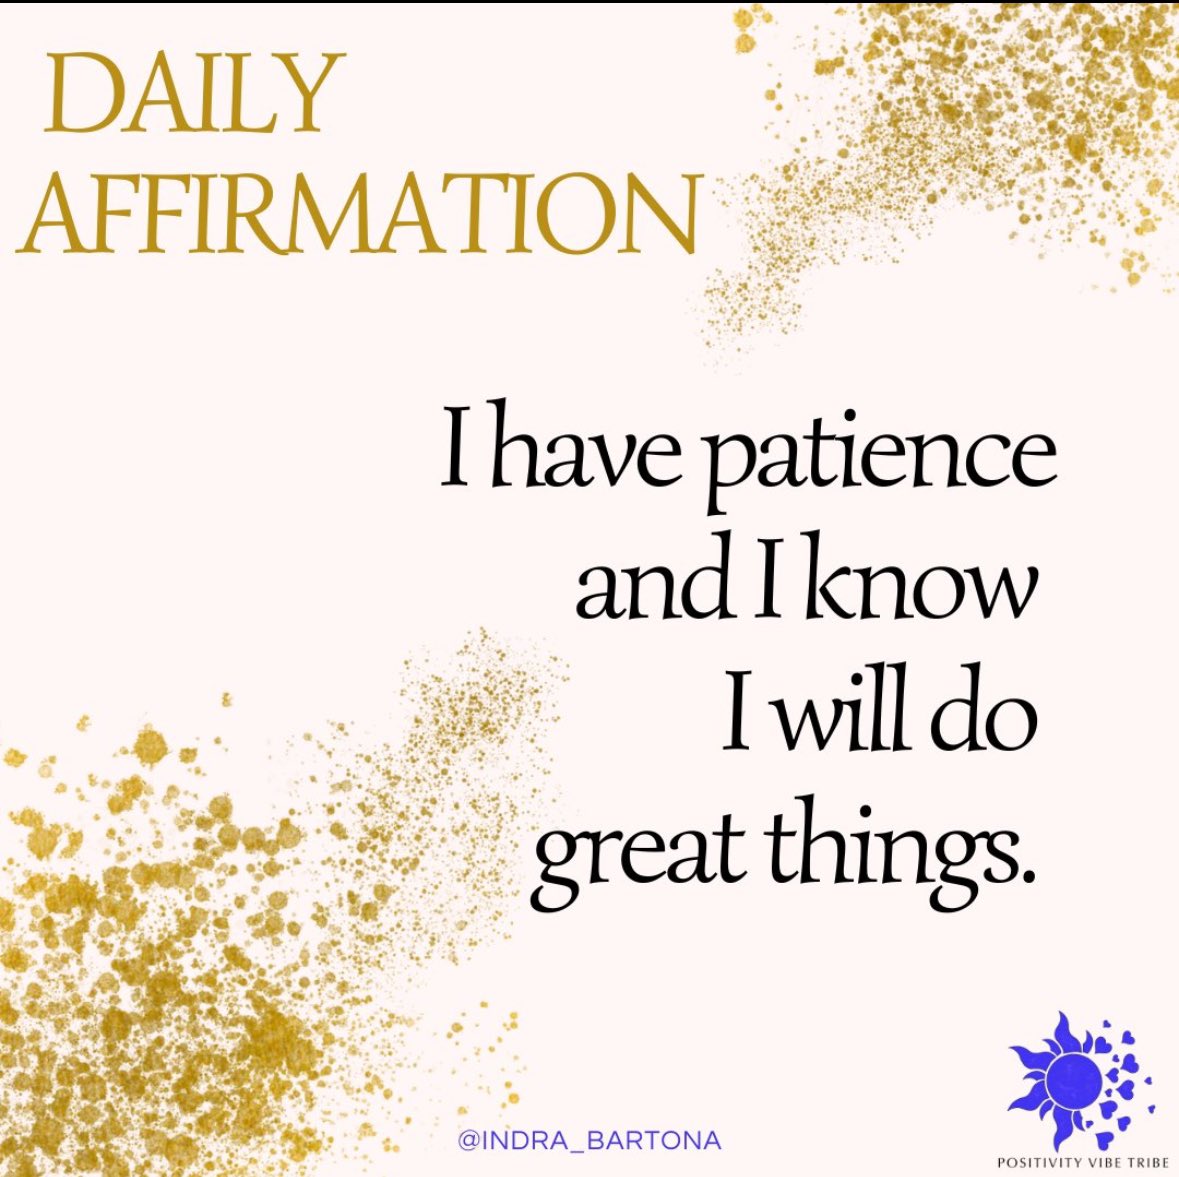 #mindset #patience #selfesteem #purpose 

Good morning 😃🌅

Again a daily affirmation. 

I was inspired to write ✍️ on patience by a post yesterday afternoon from a friend of mine. 
I was lucky to find the quote below, by Indra Bartona, in my quotes safe. 

It suggests that the